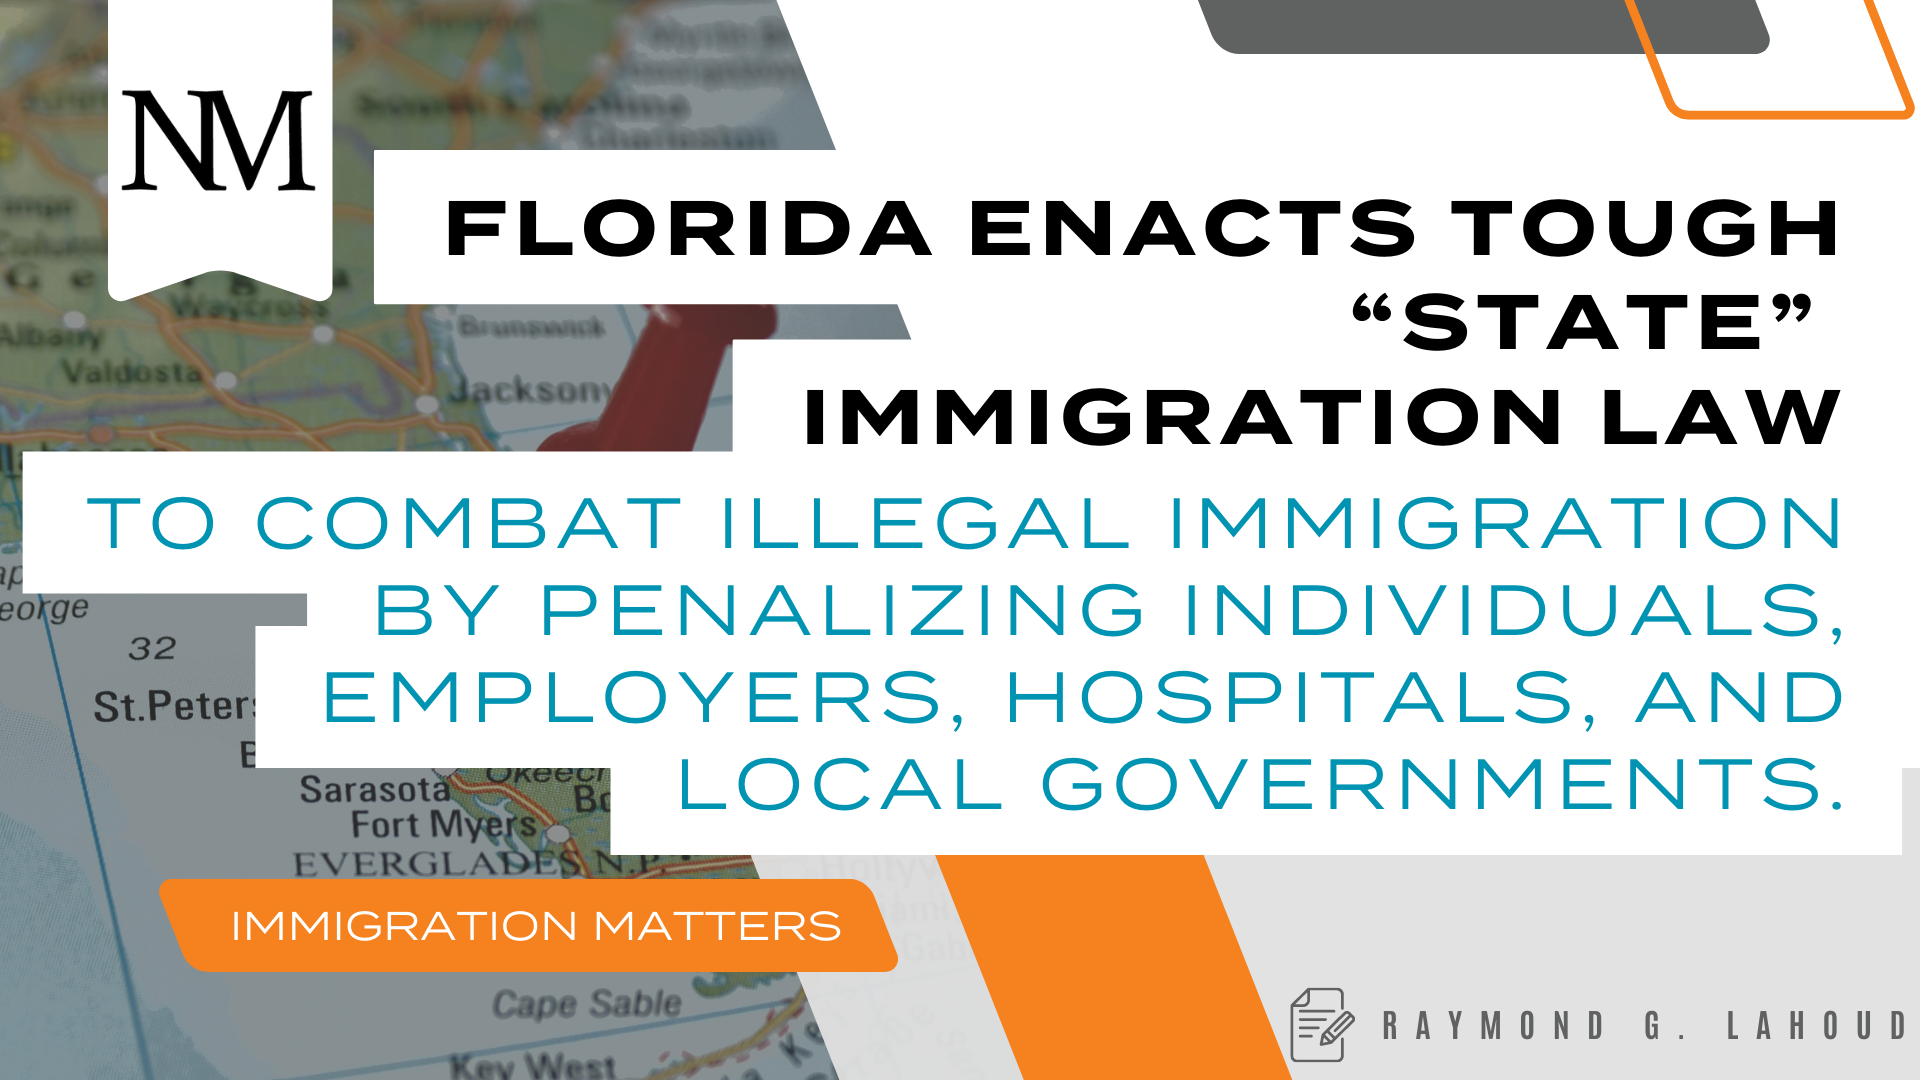 Florida Enacts Tough “State” Law to Combat Illegal Immigration through Penalization